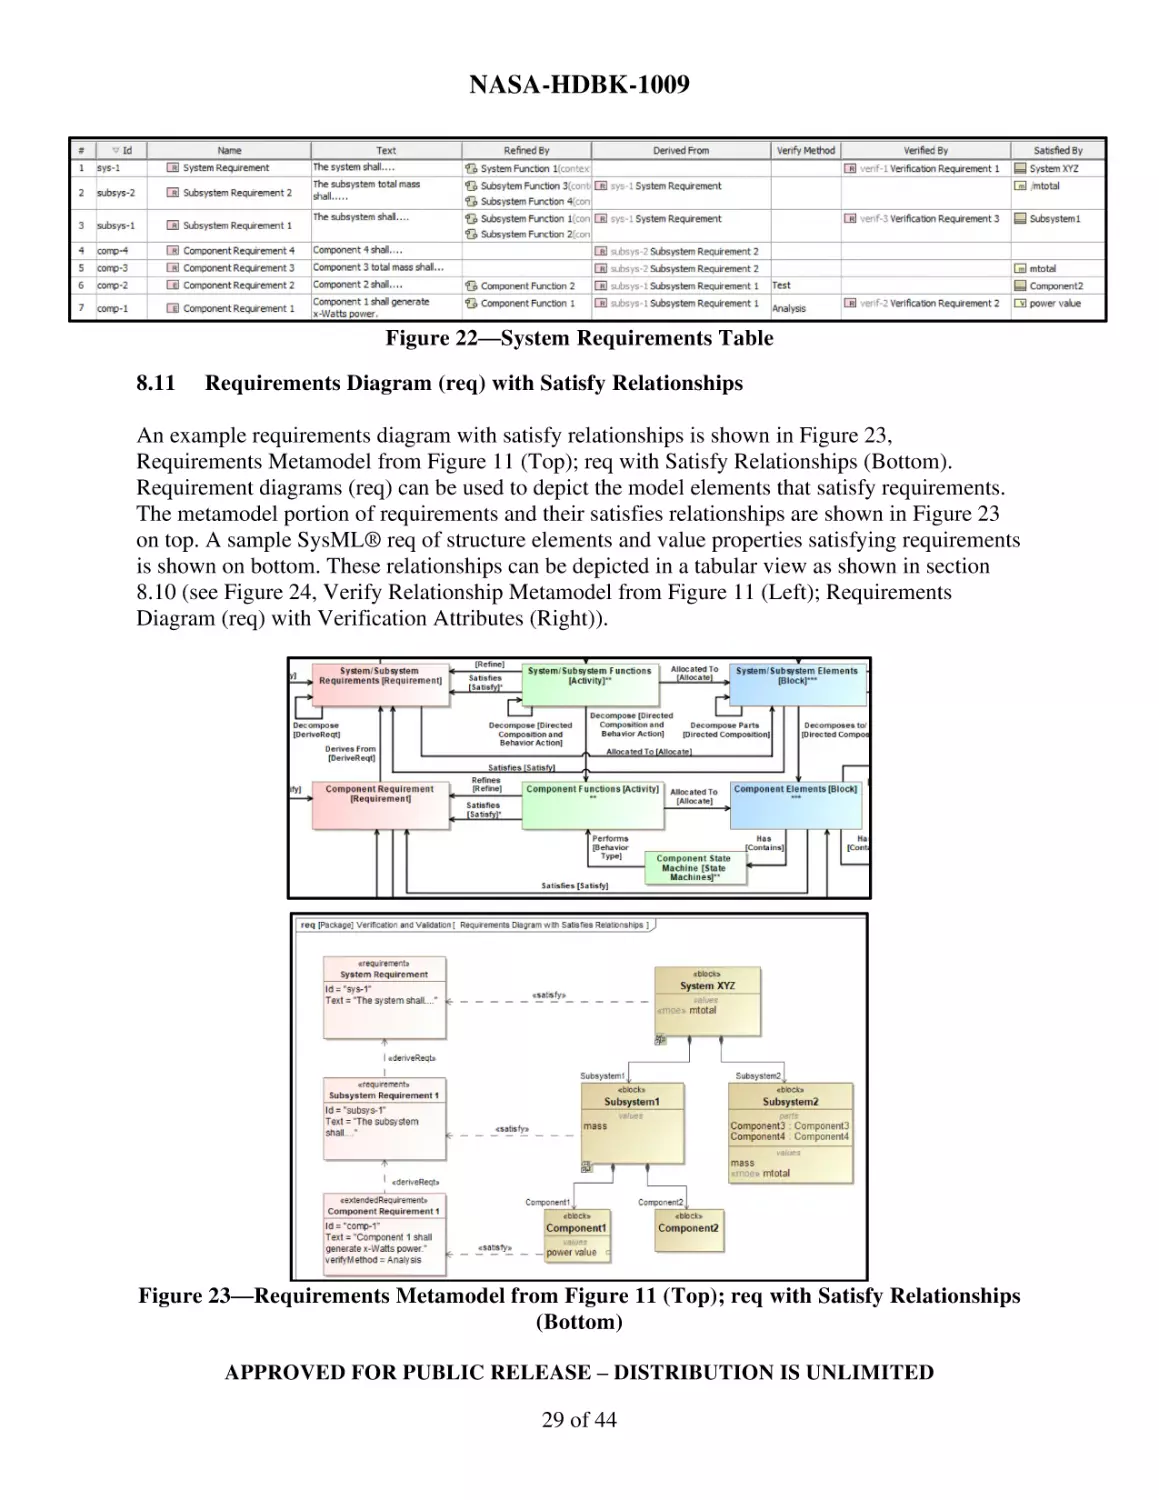 8.11 Requirements Diagram (req) with Satisfy Relationships